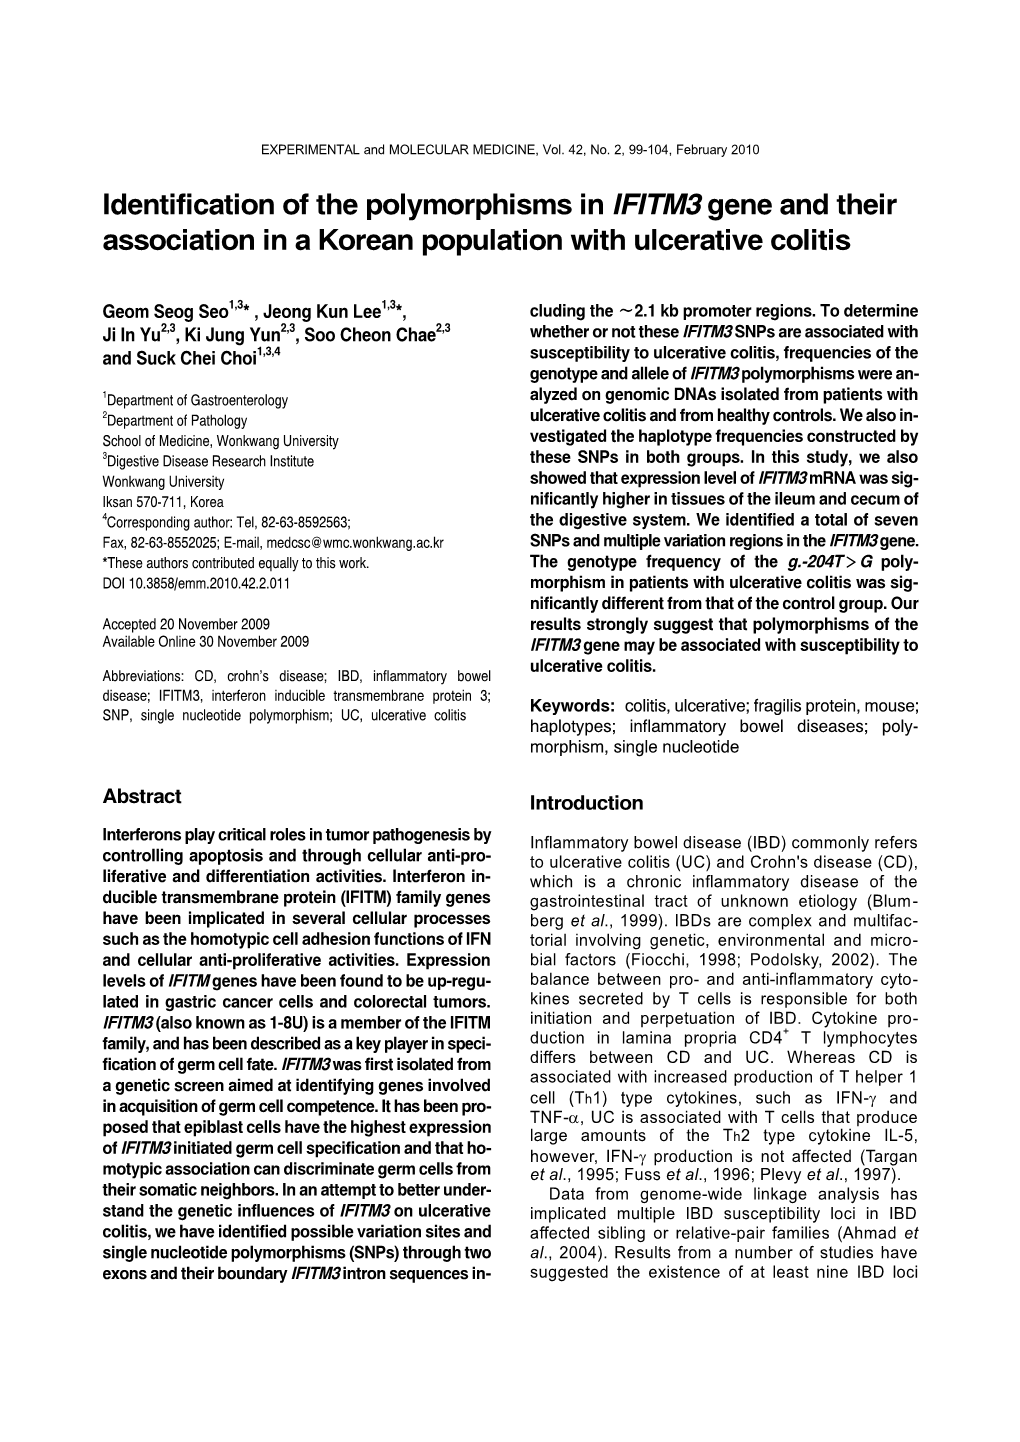 Identification of the Polymorphisms in IFITM3 Gene and Their Association in a Korean Population with Ulcerative Colitis